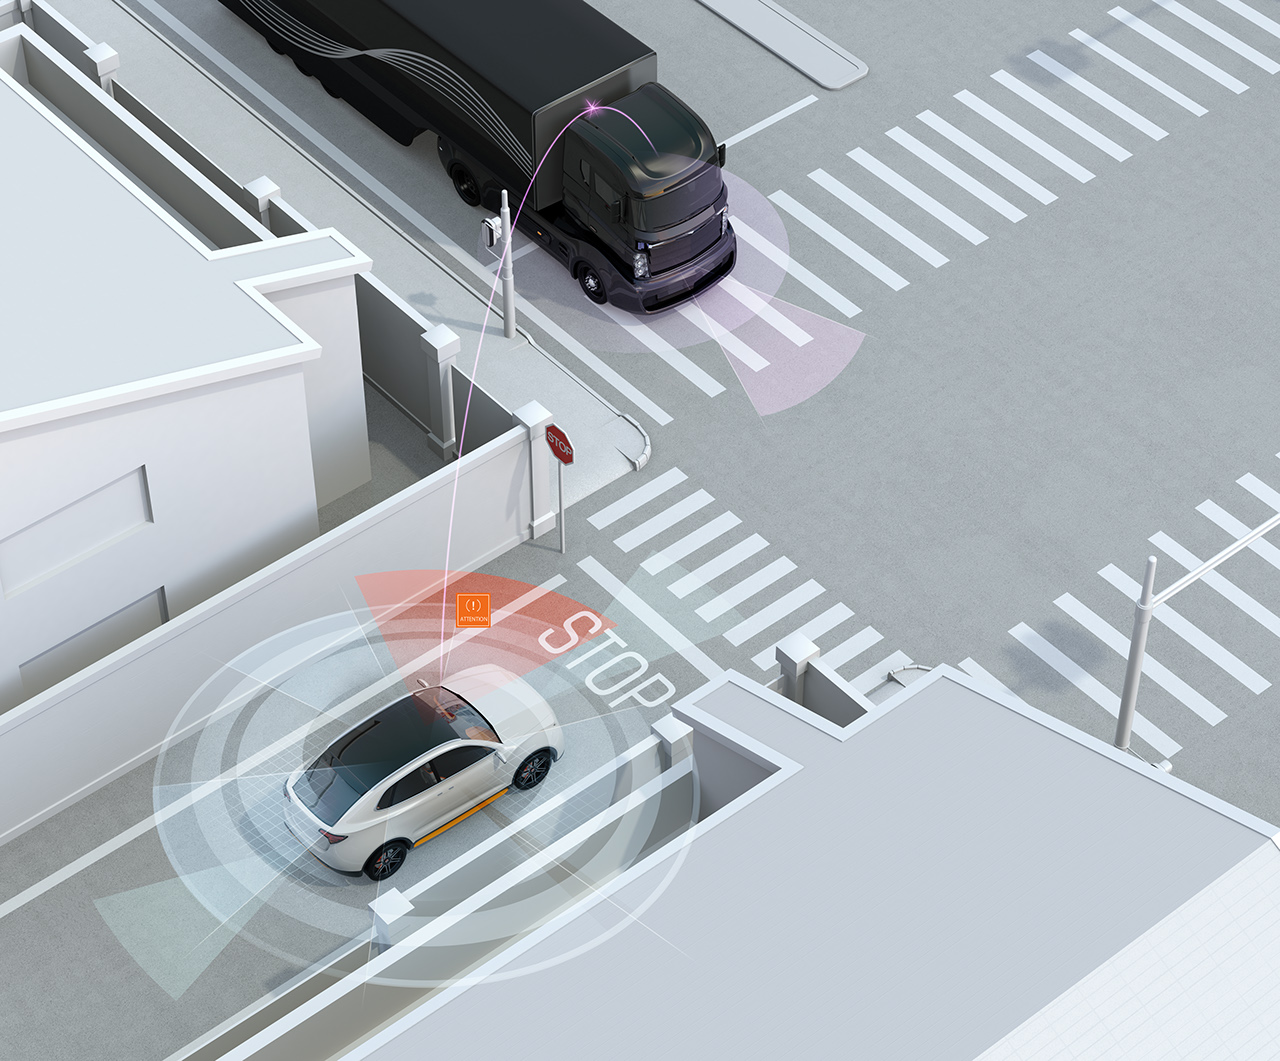 White SUV in one-way street detected vehicle in the blind spot. Connected car concept. 3D rendering image.